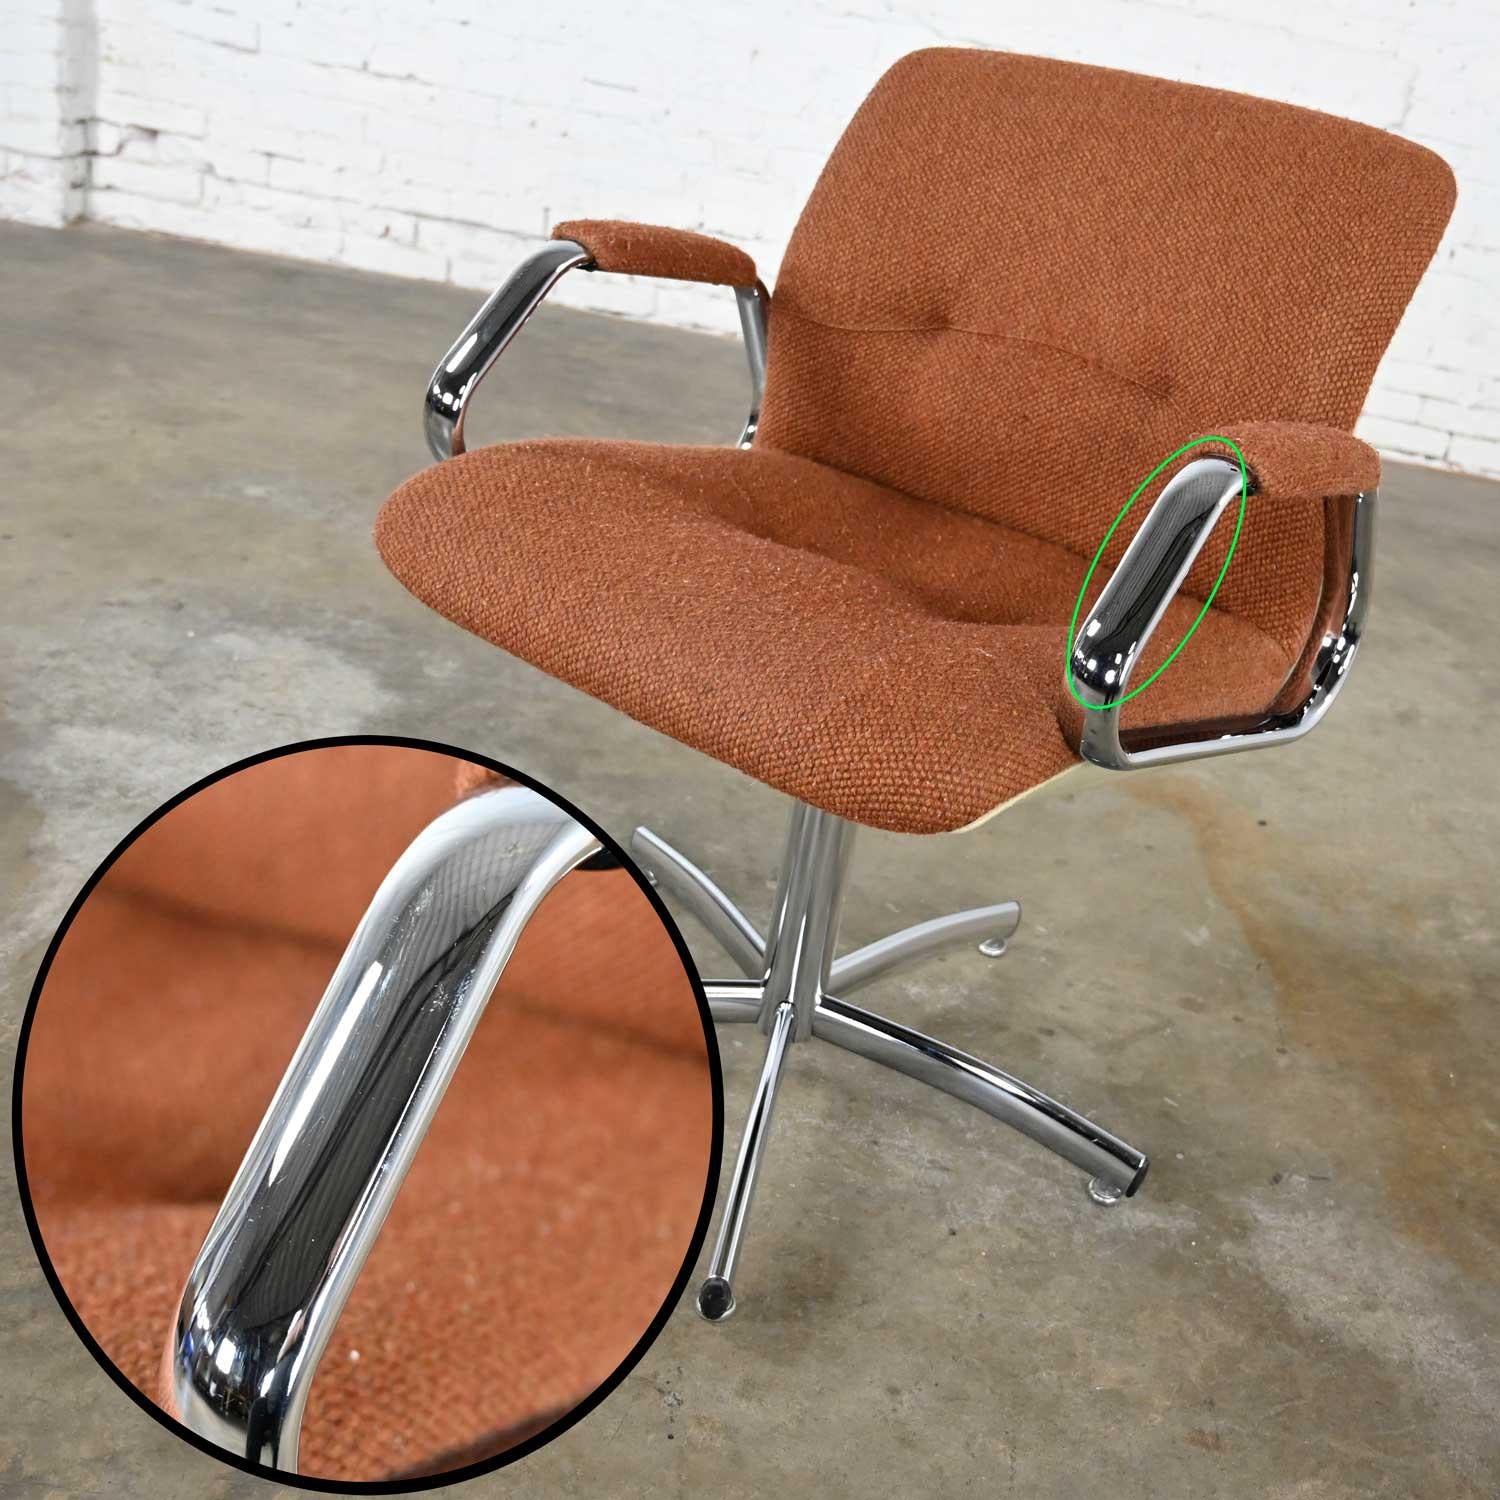 20th Century Steelcase Chrome Brown Upholstery Swivel Chair Model #454 Style Charles Pollock